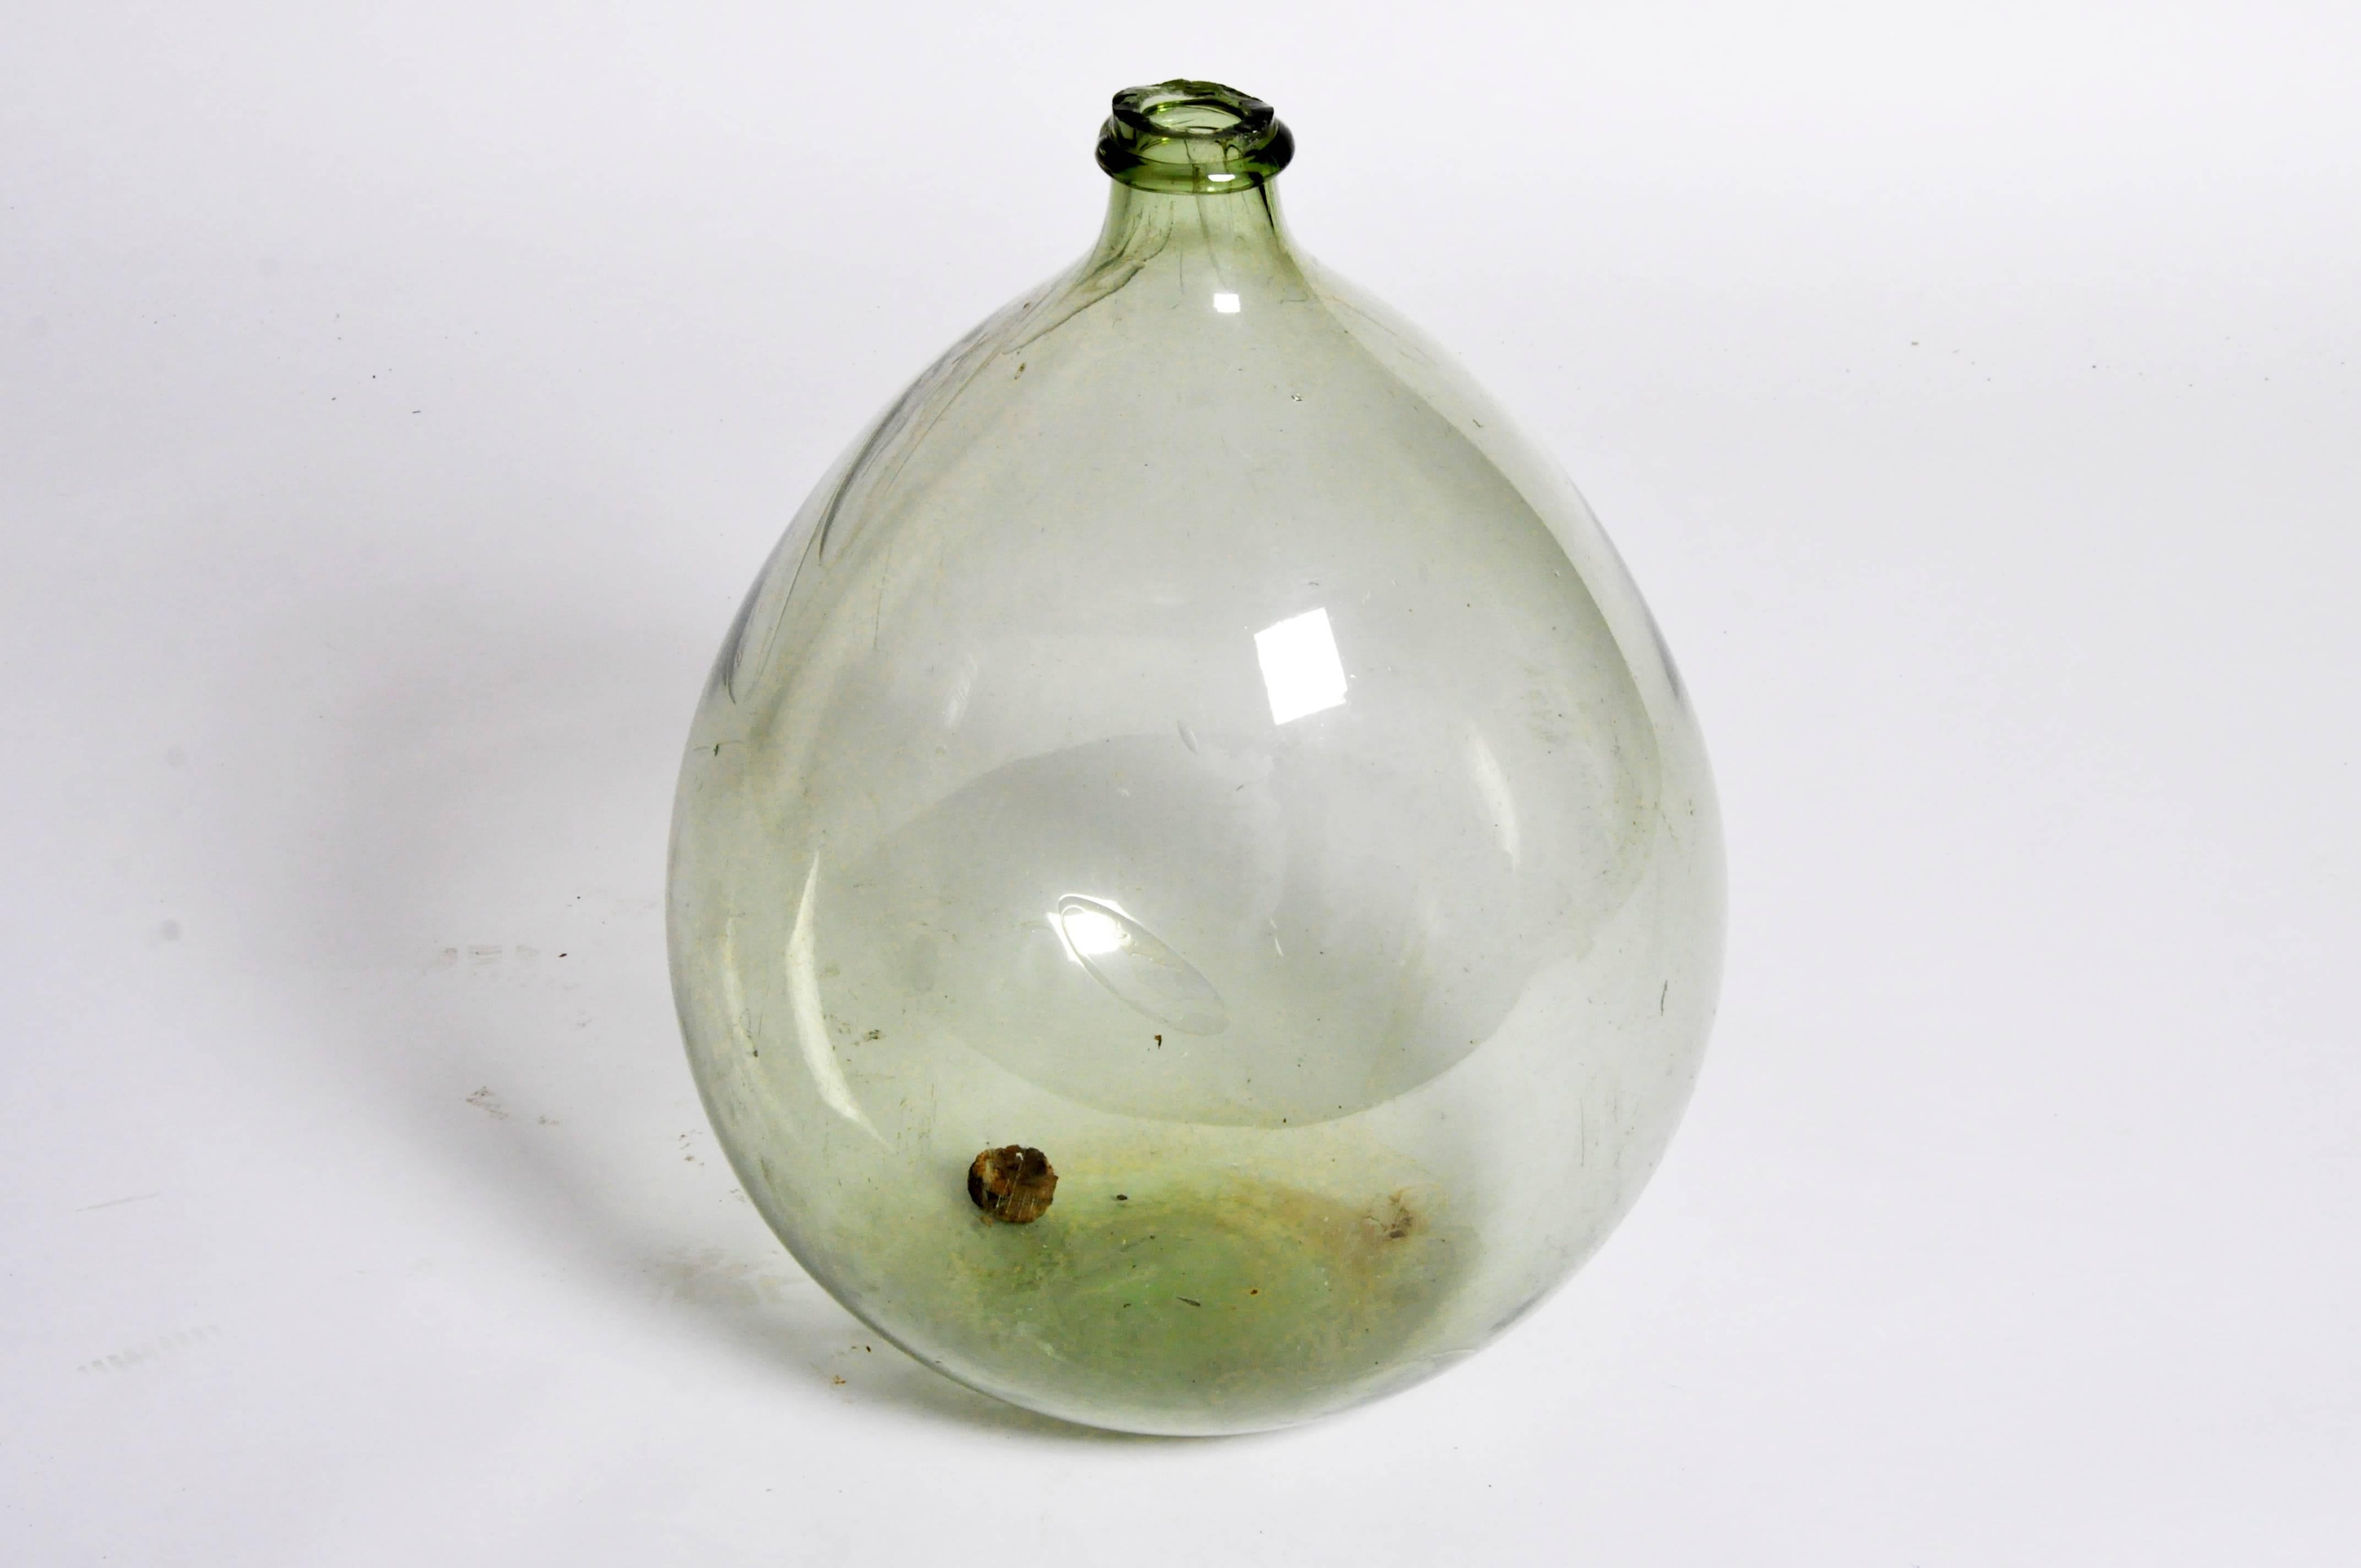 This wine jar is from Barcelona, Spain, and is made from glass, circa 20th century.